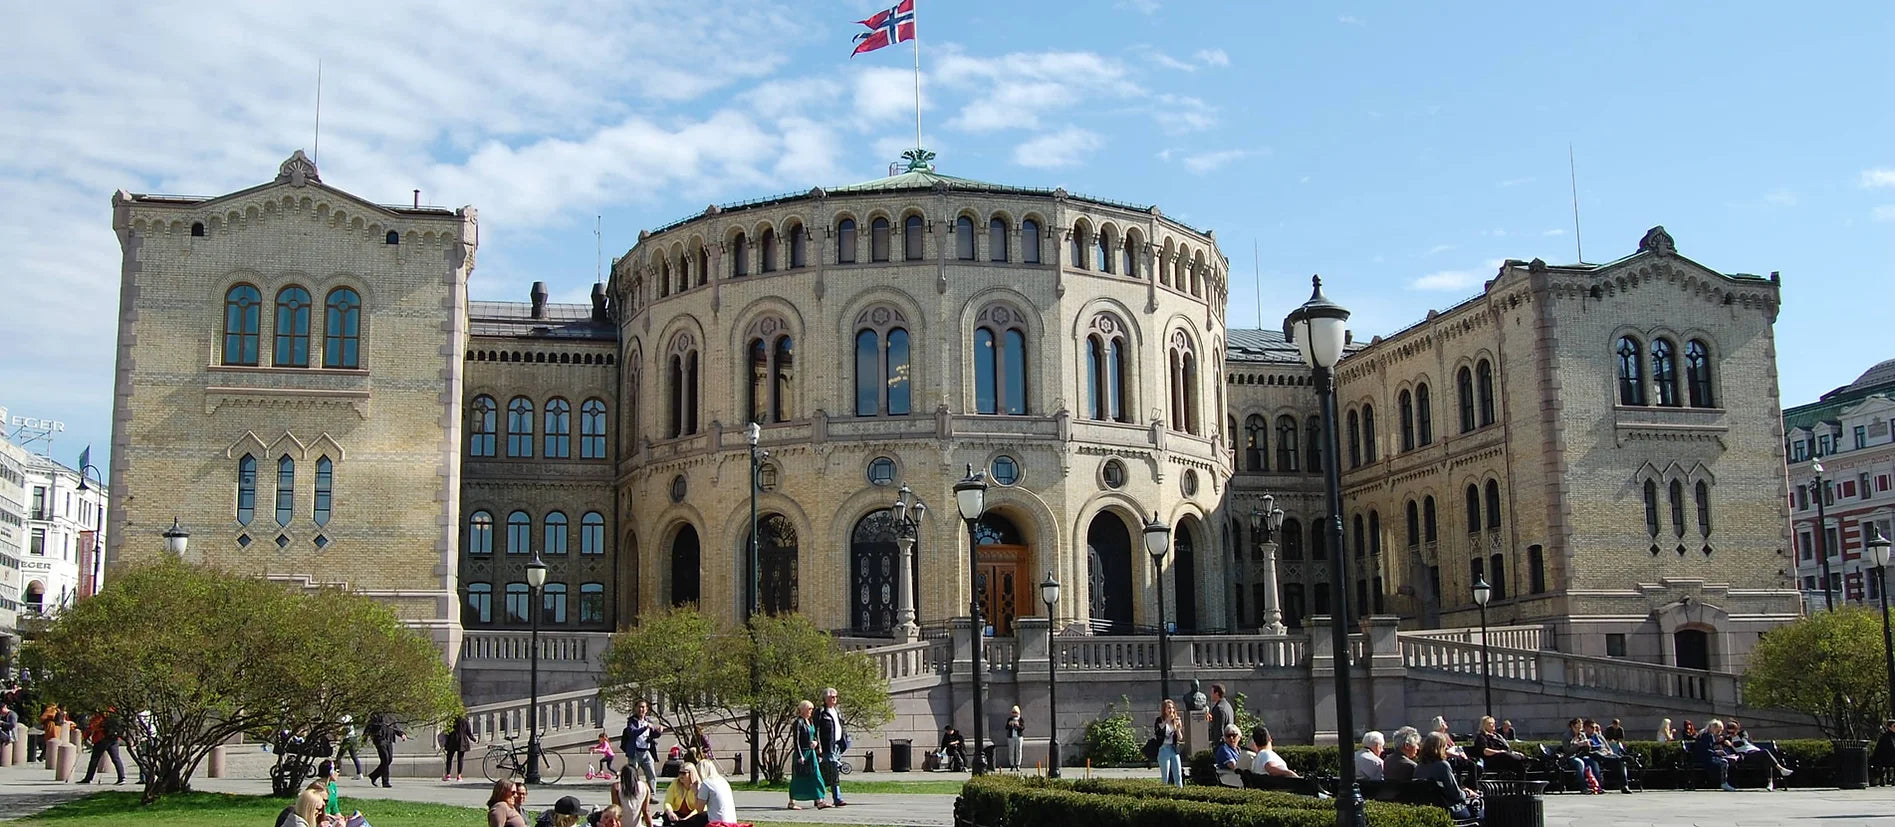 Oslo - The Murder by the Parliament (Stortinget)